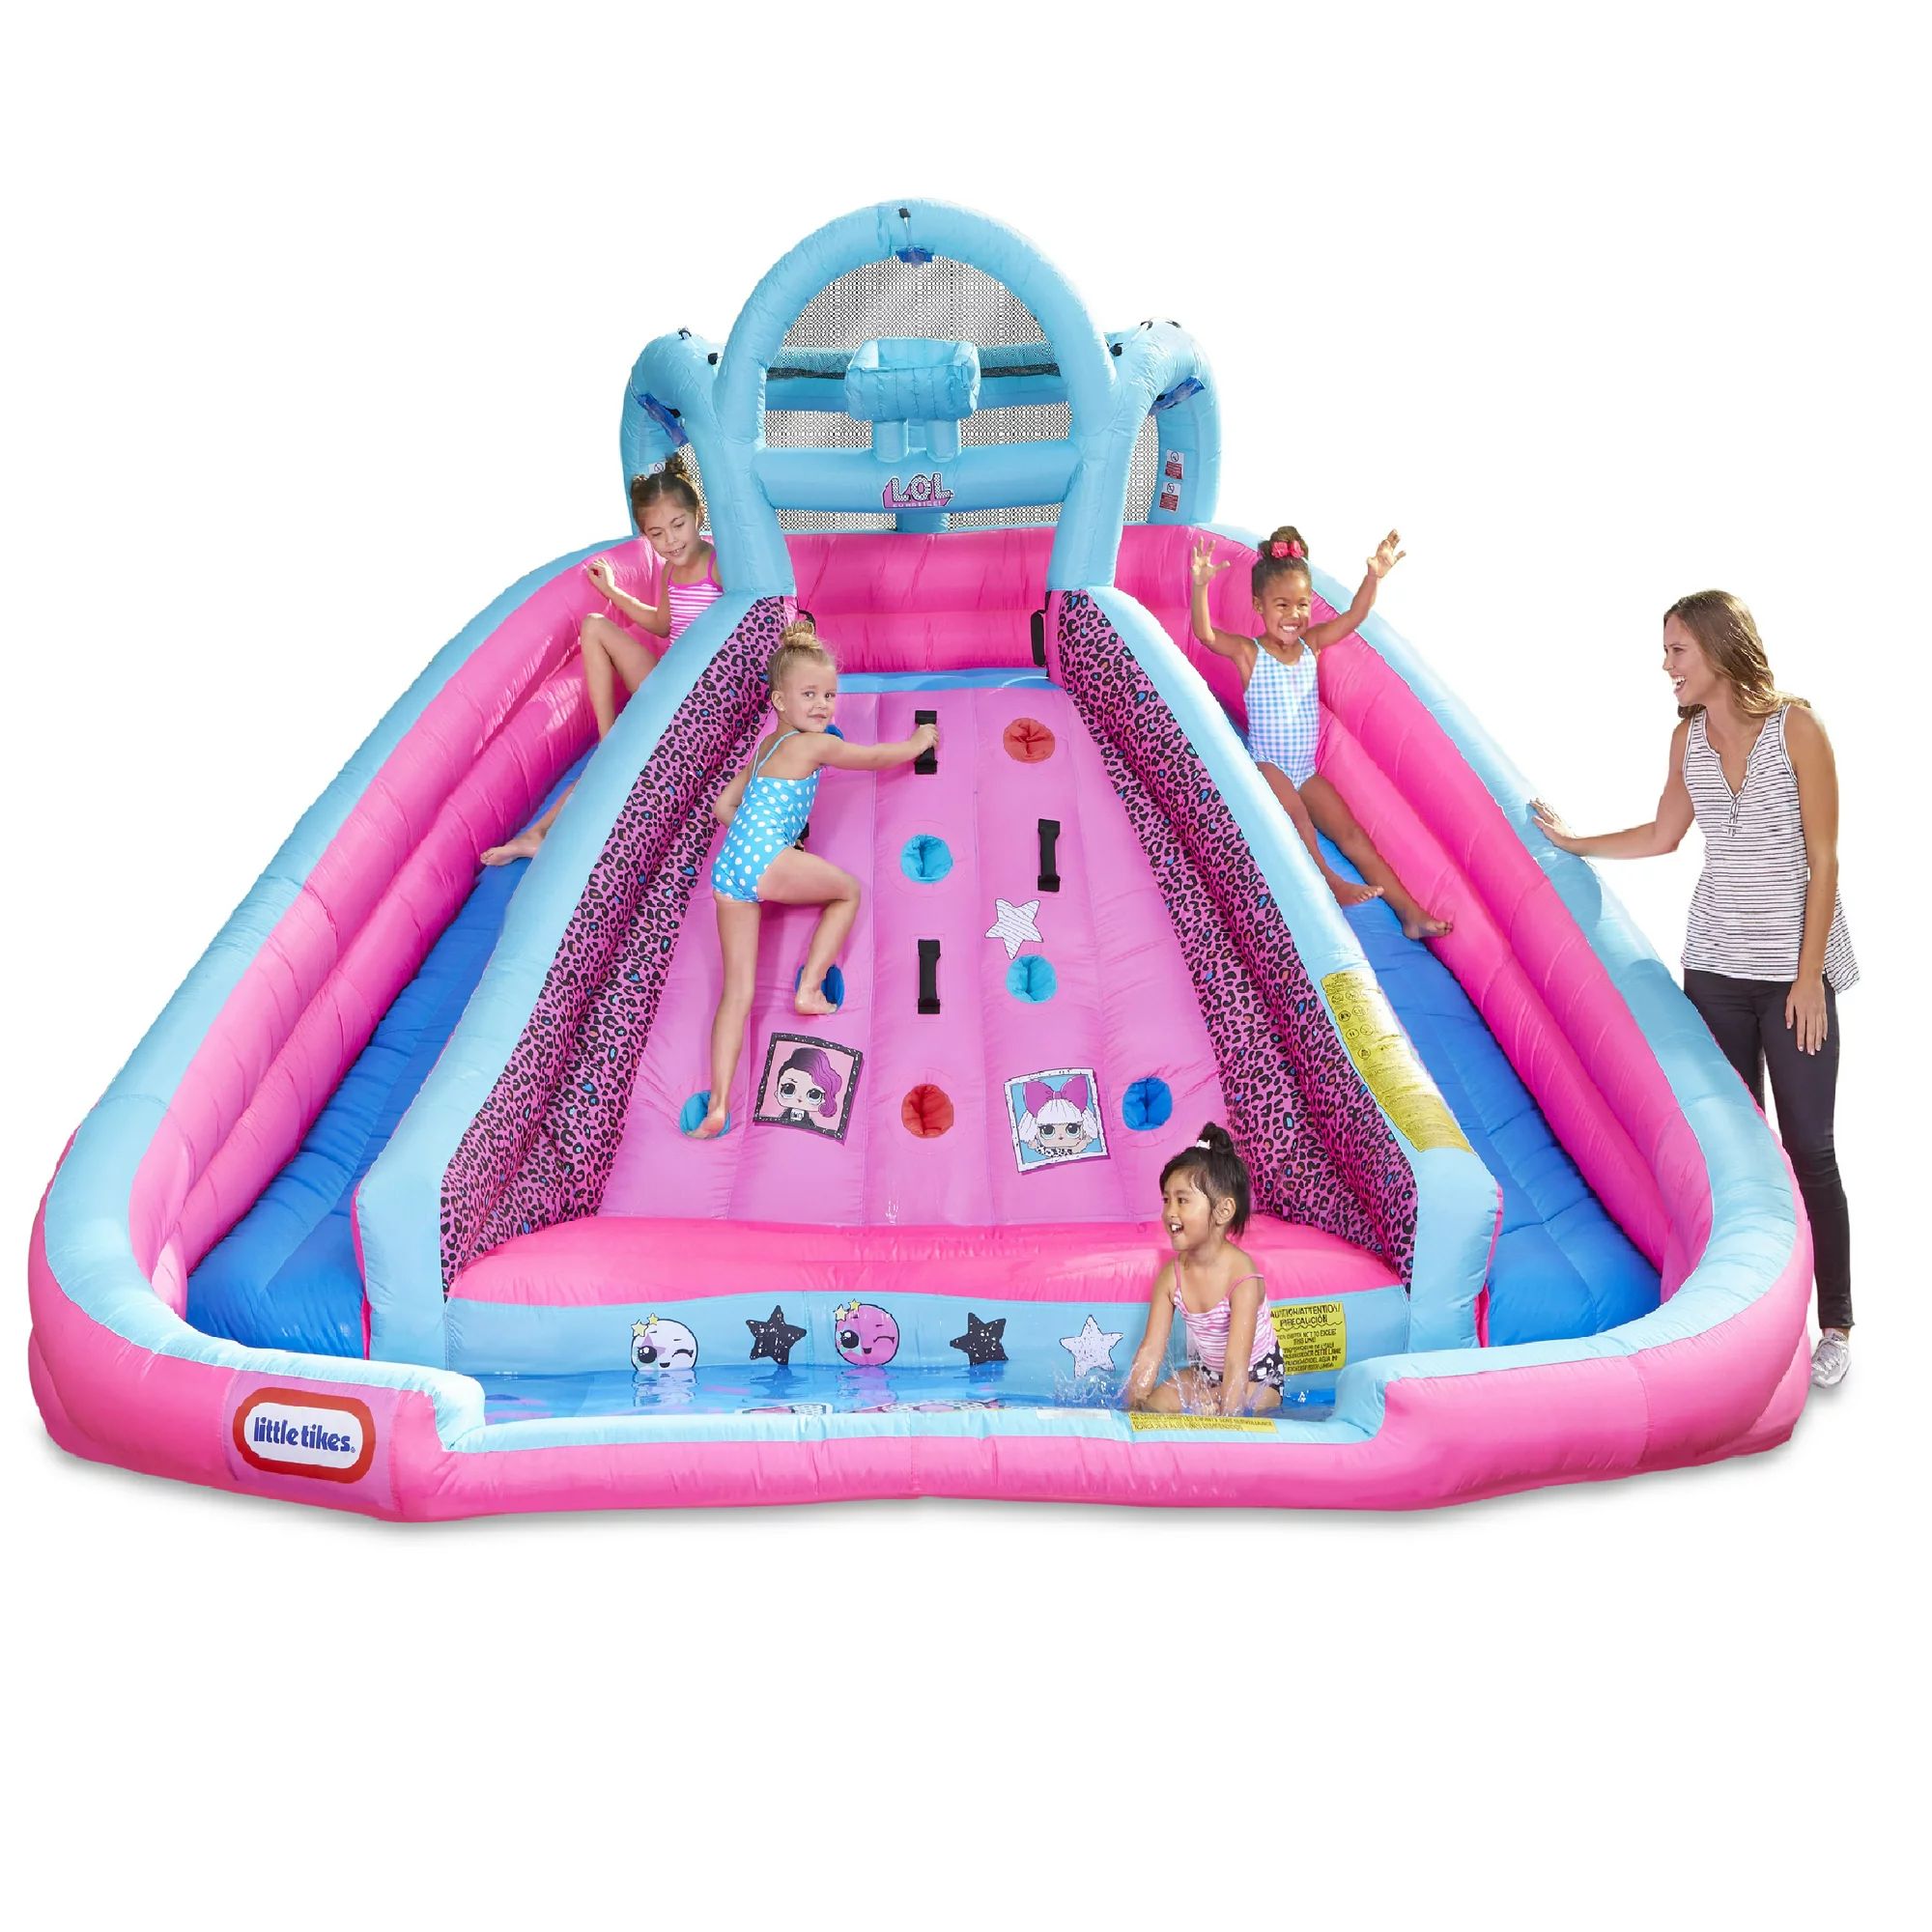 L.O.L. Surprise! Inflatable River Race Water Slide with Blower | Walmart (US)